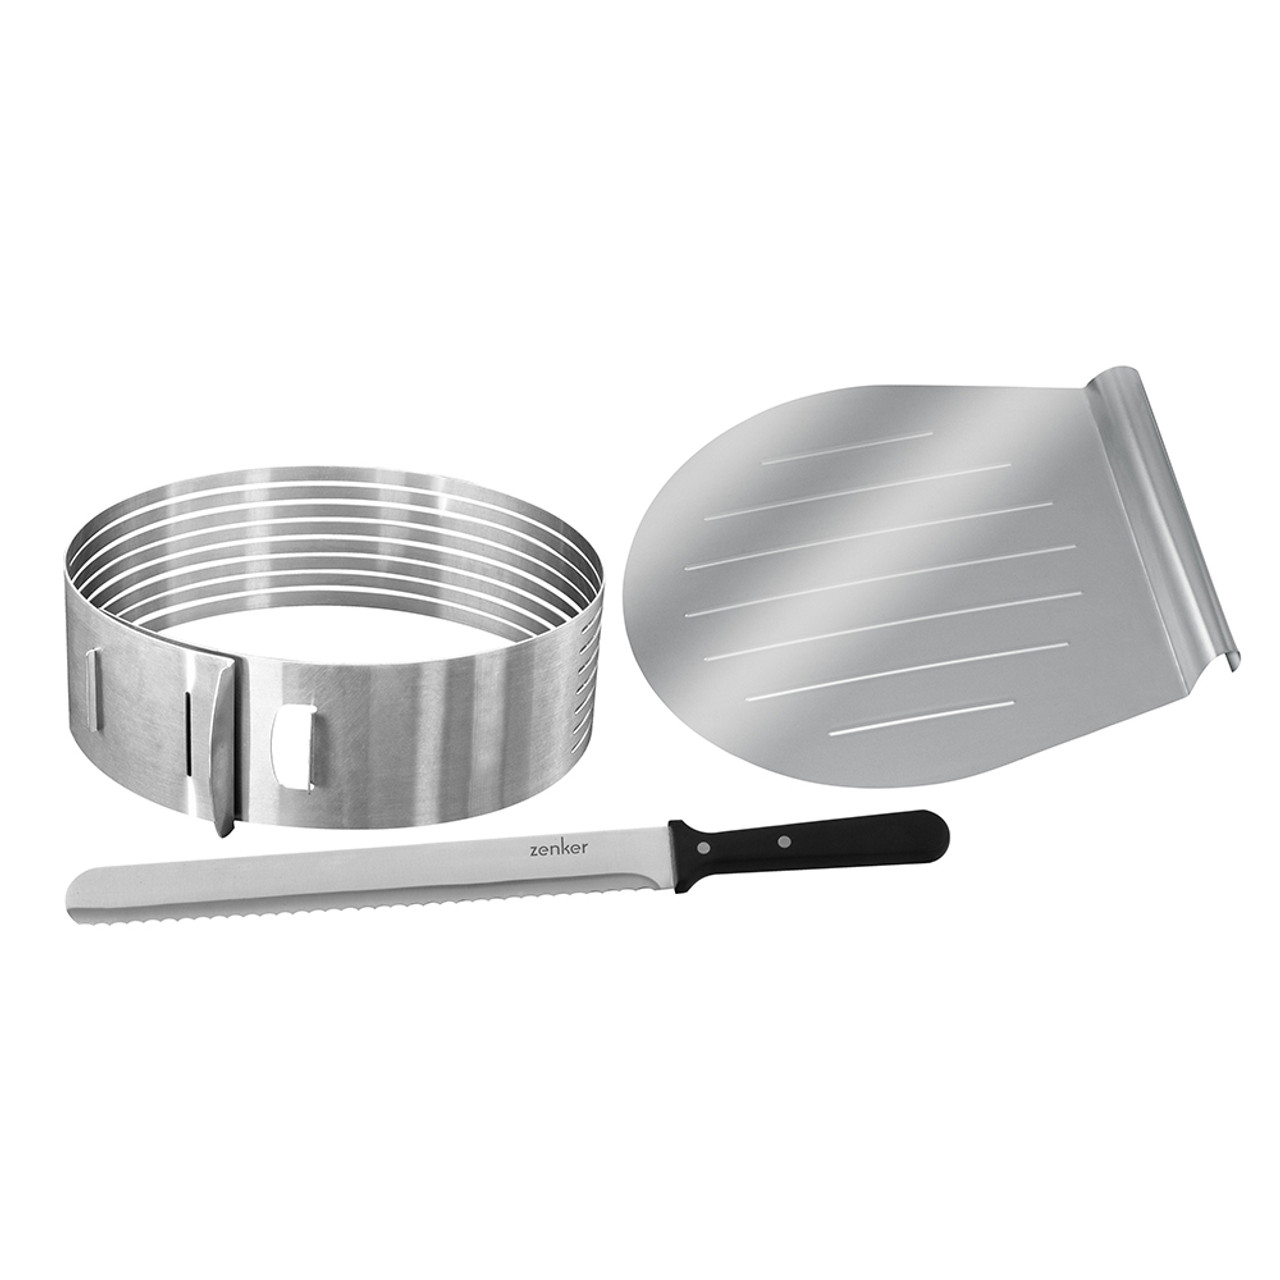 Frieling Pastry Cutter & Reviews